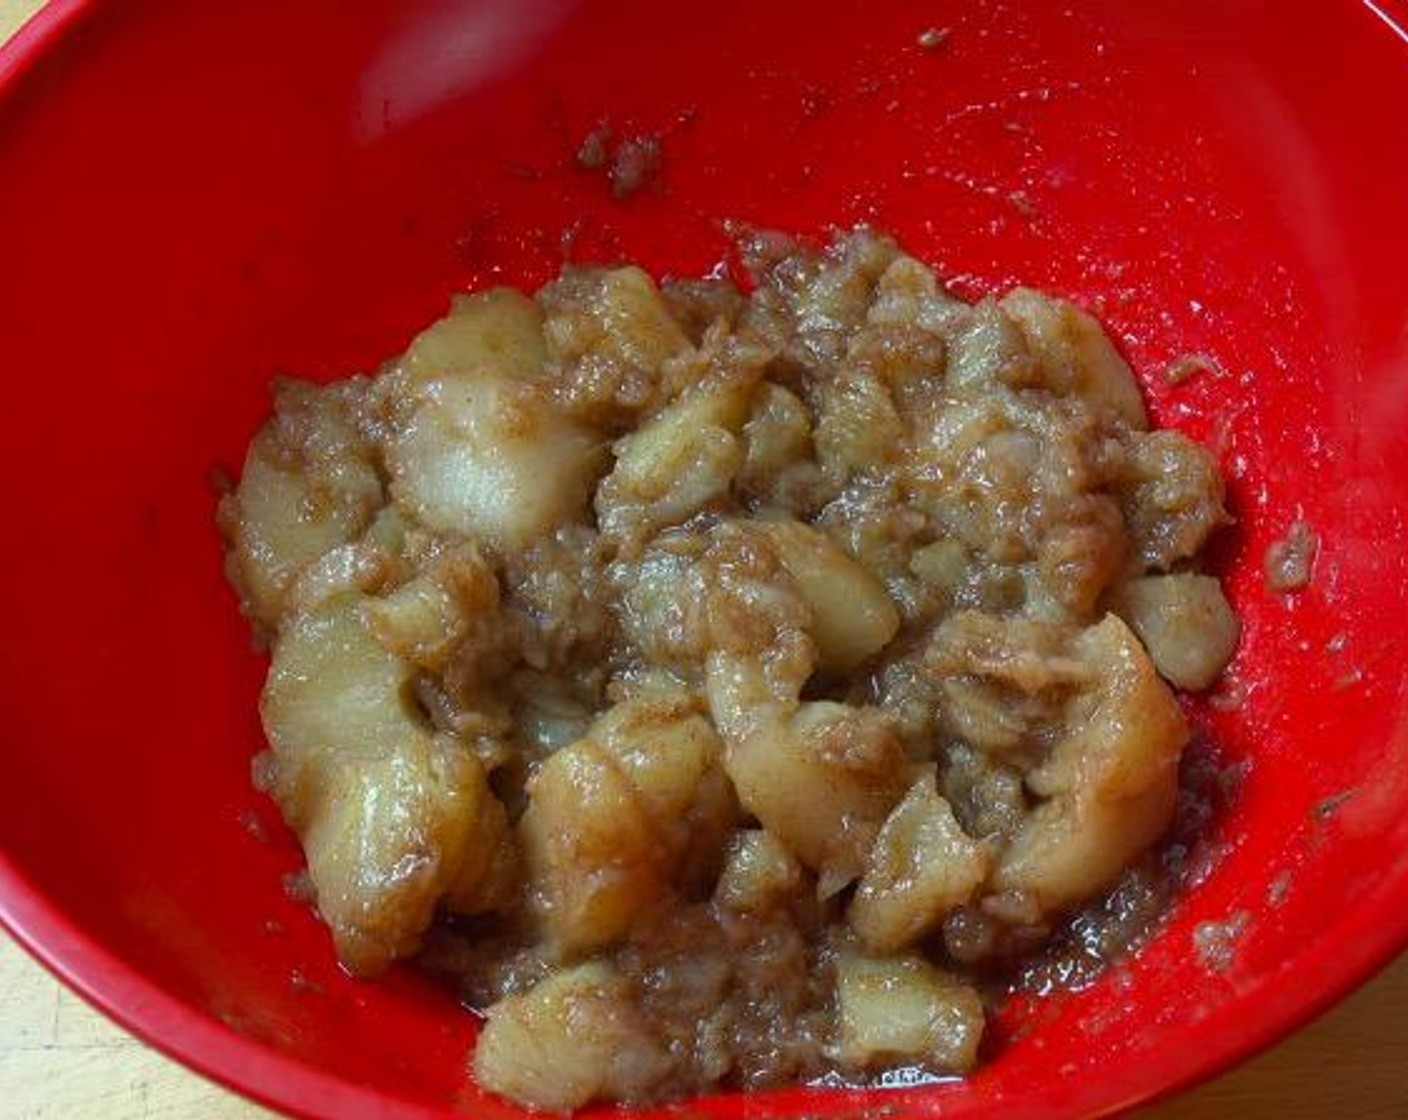 step 1 In a large mixing bowl, add Apple Pie Filling (3 cups), Brown Sugar (1/4 cup) and Ground Cinnamon (1 tsp). Mix together until all the apples are coated. Set aside for 5 minutes.